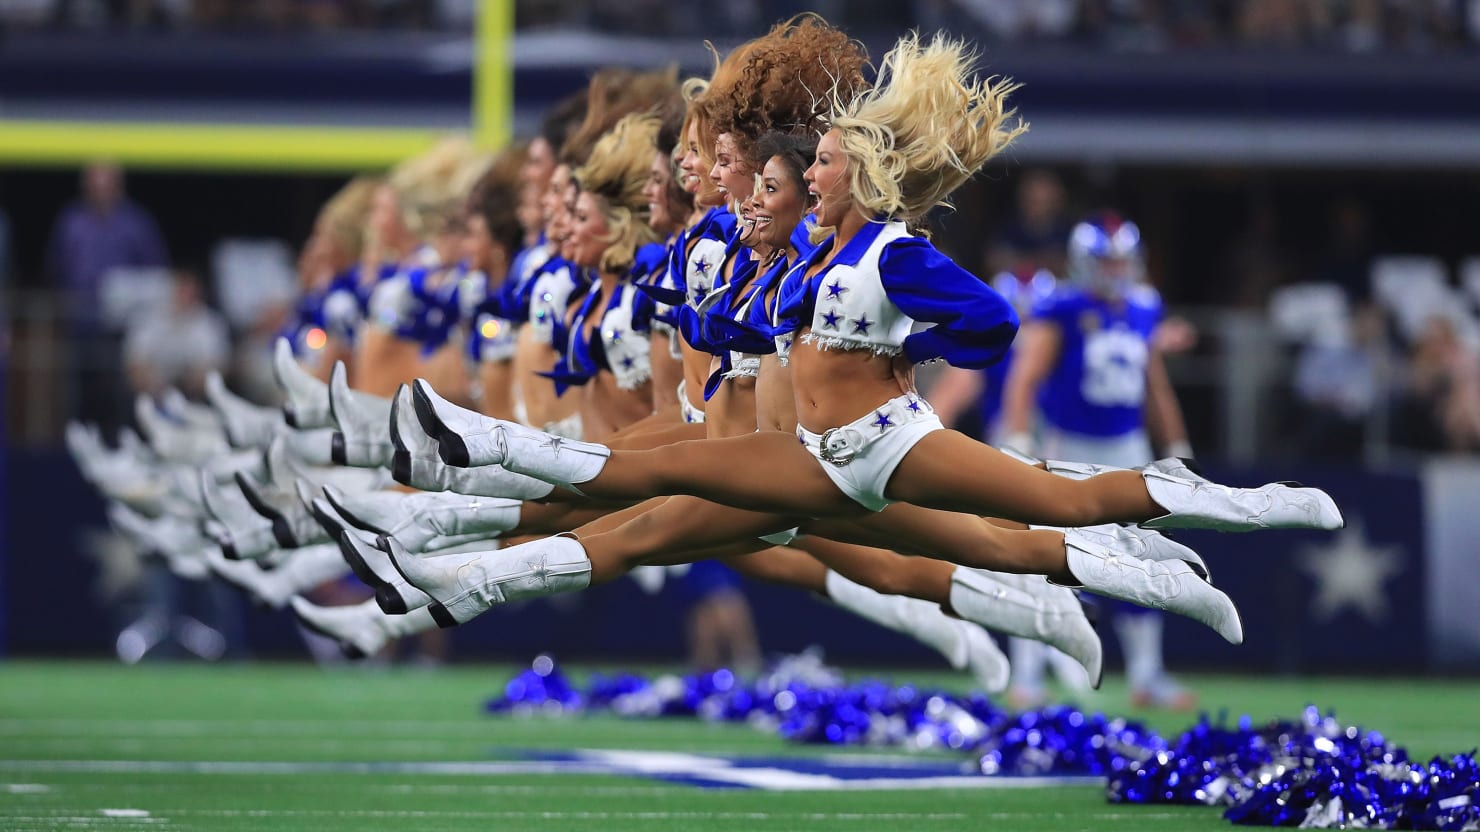 Dallas Cowboys Cheerleaders reality show is gone from CMT, but stay tuned